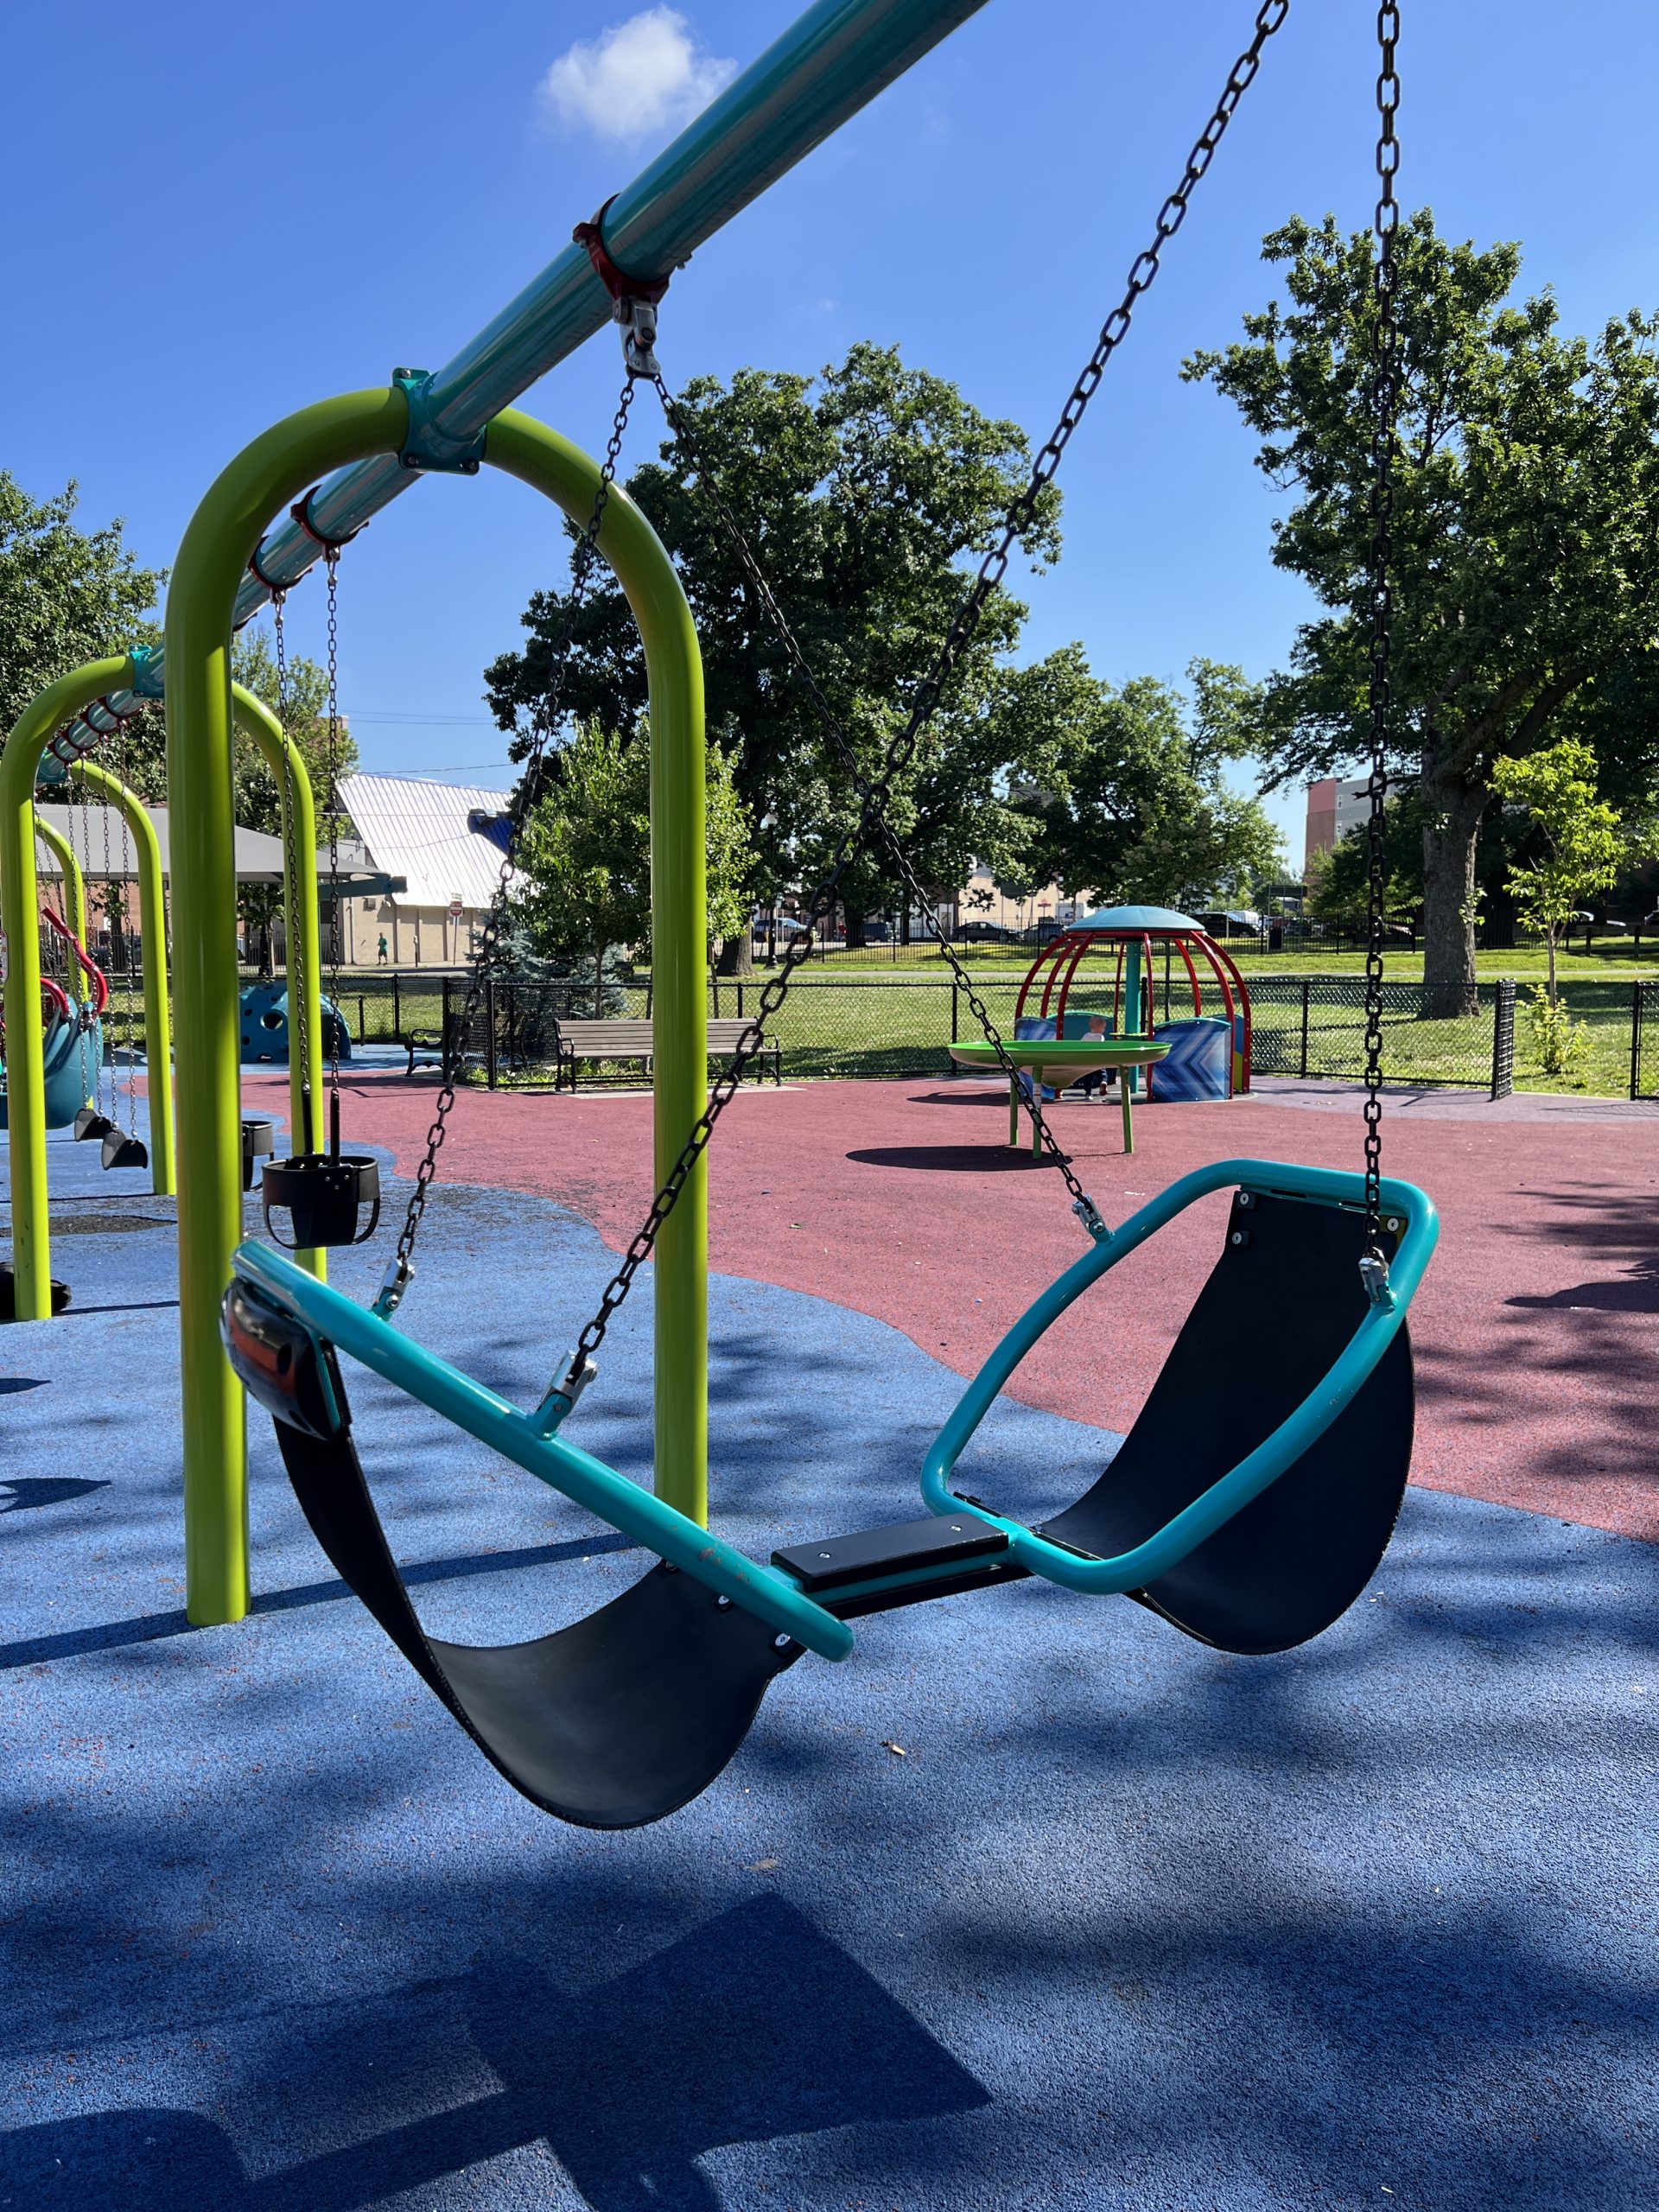 Watsessing Park Playground in Bloomfield NJ 2 person swing